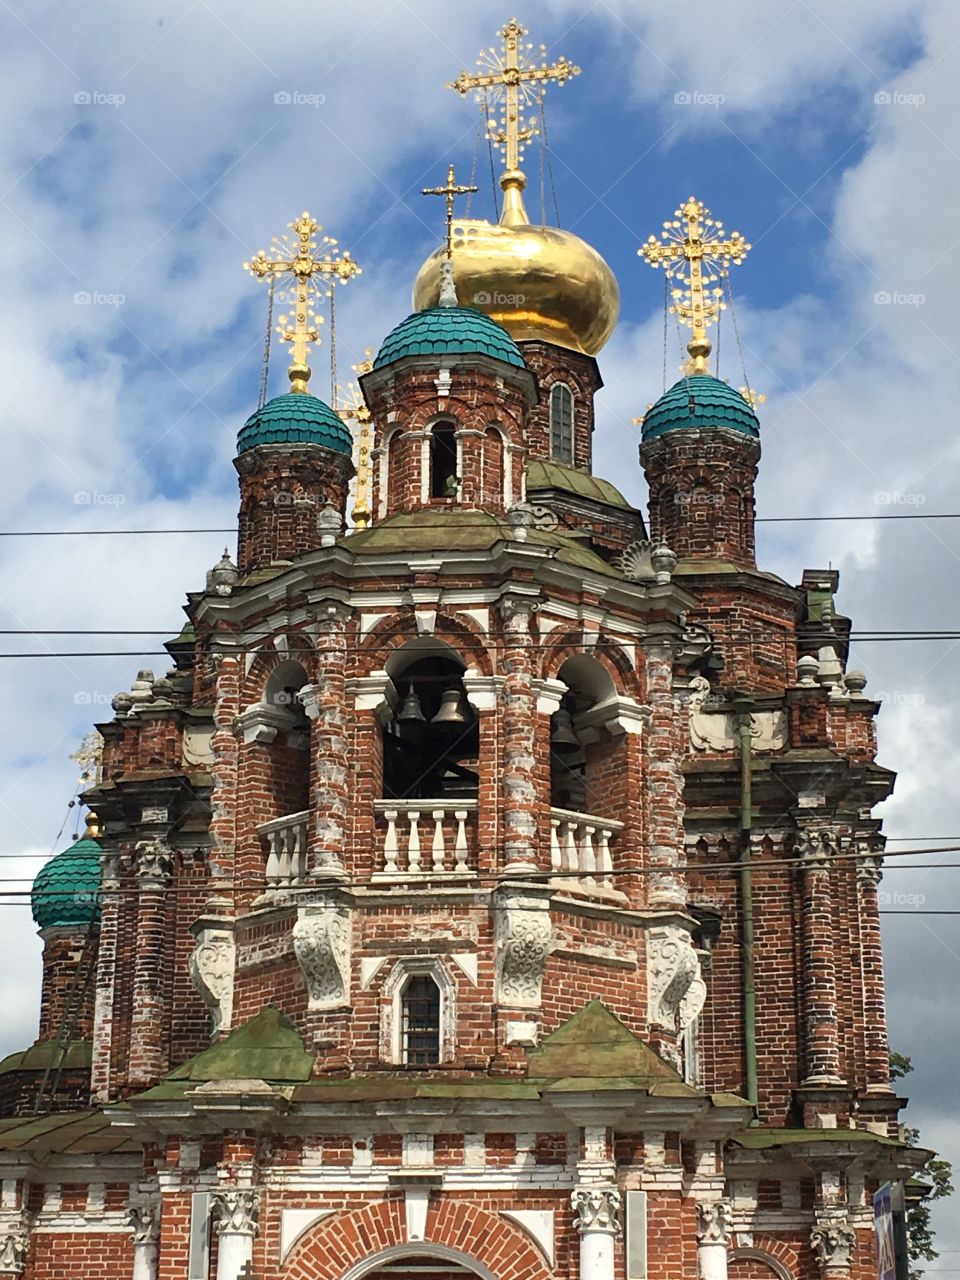 A large red Russian cathedral with domes and crosses